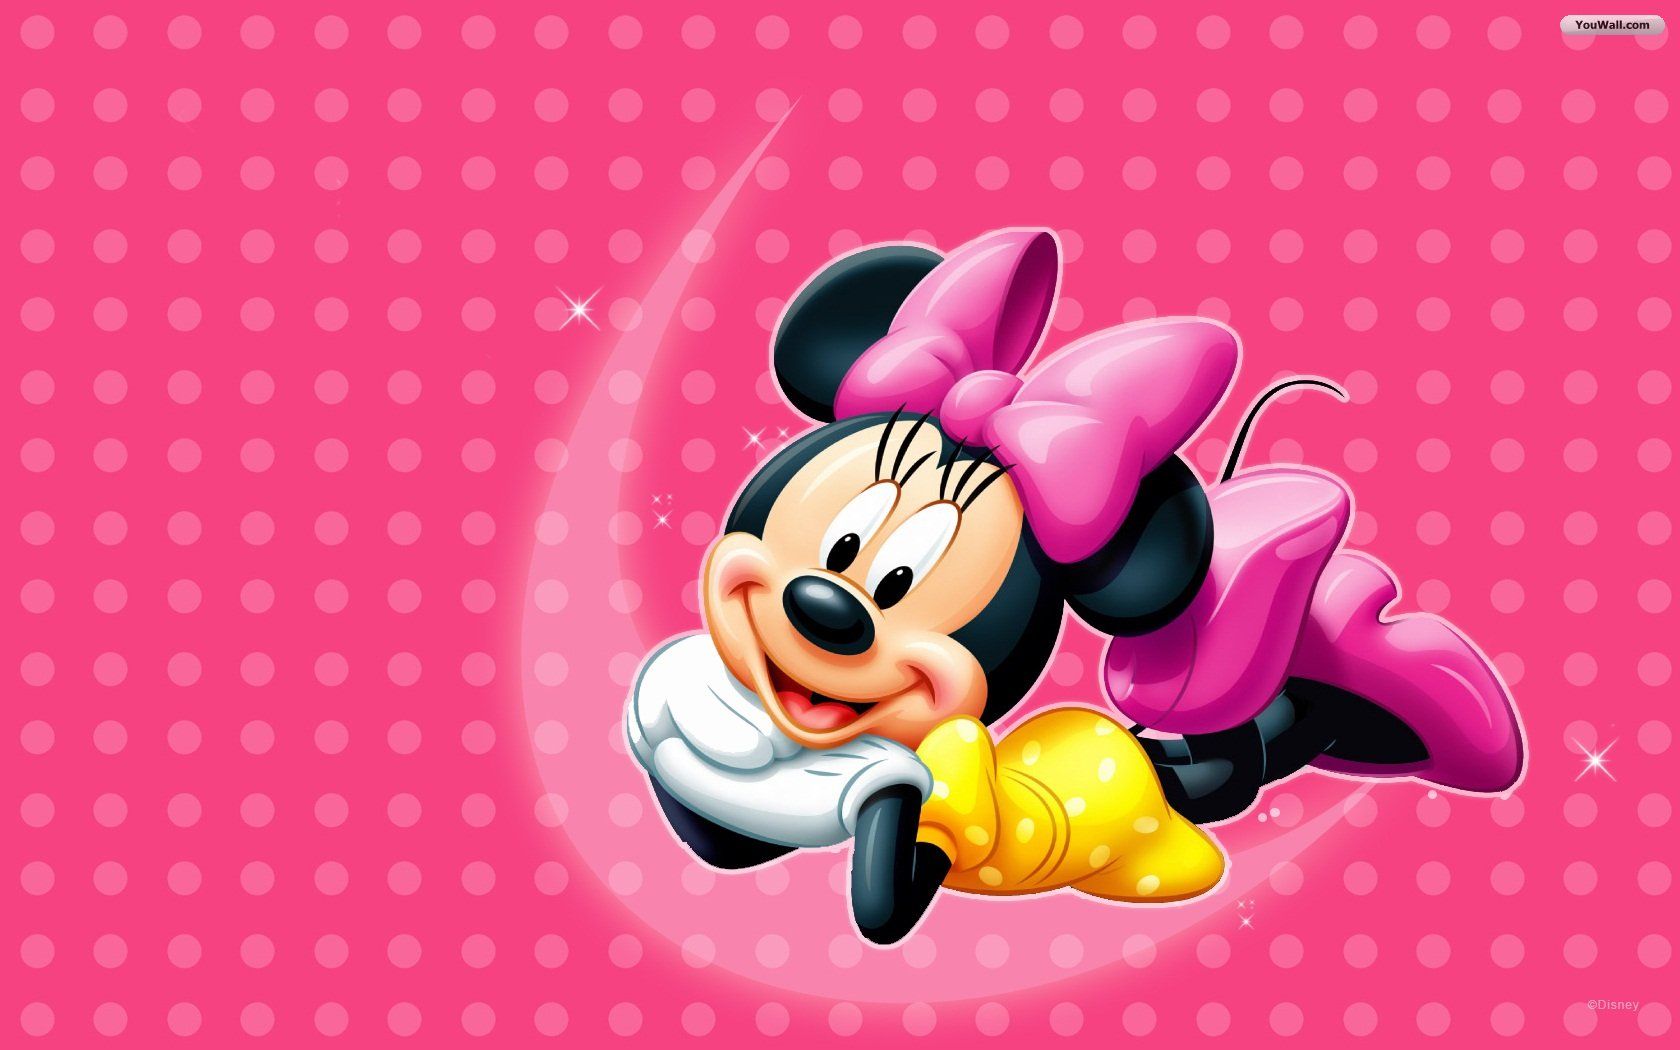 YouWall - Minnie Mouse Wallpaper - wallpaper,wallpapers,free